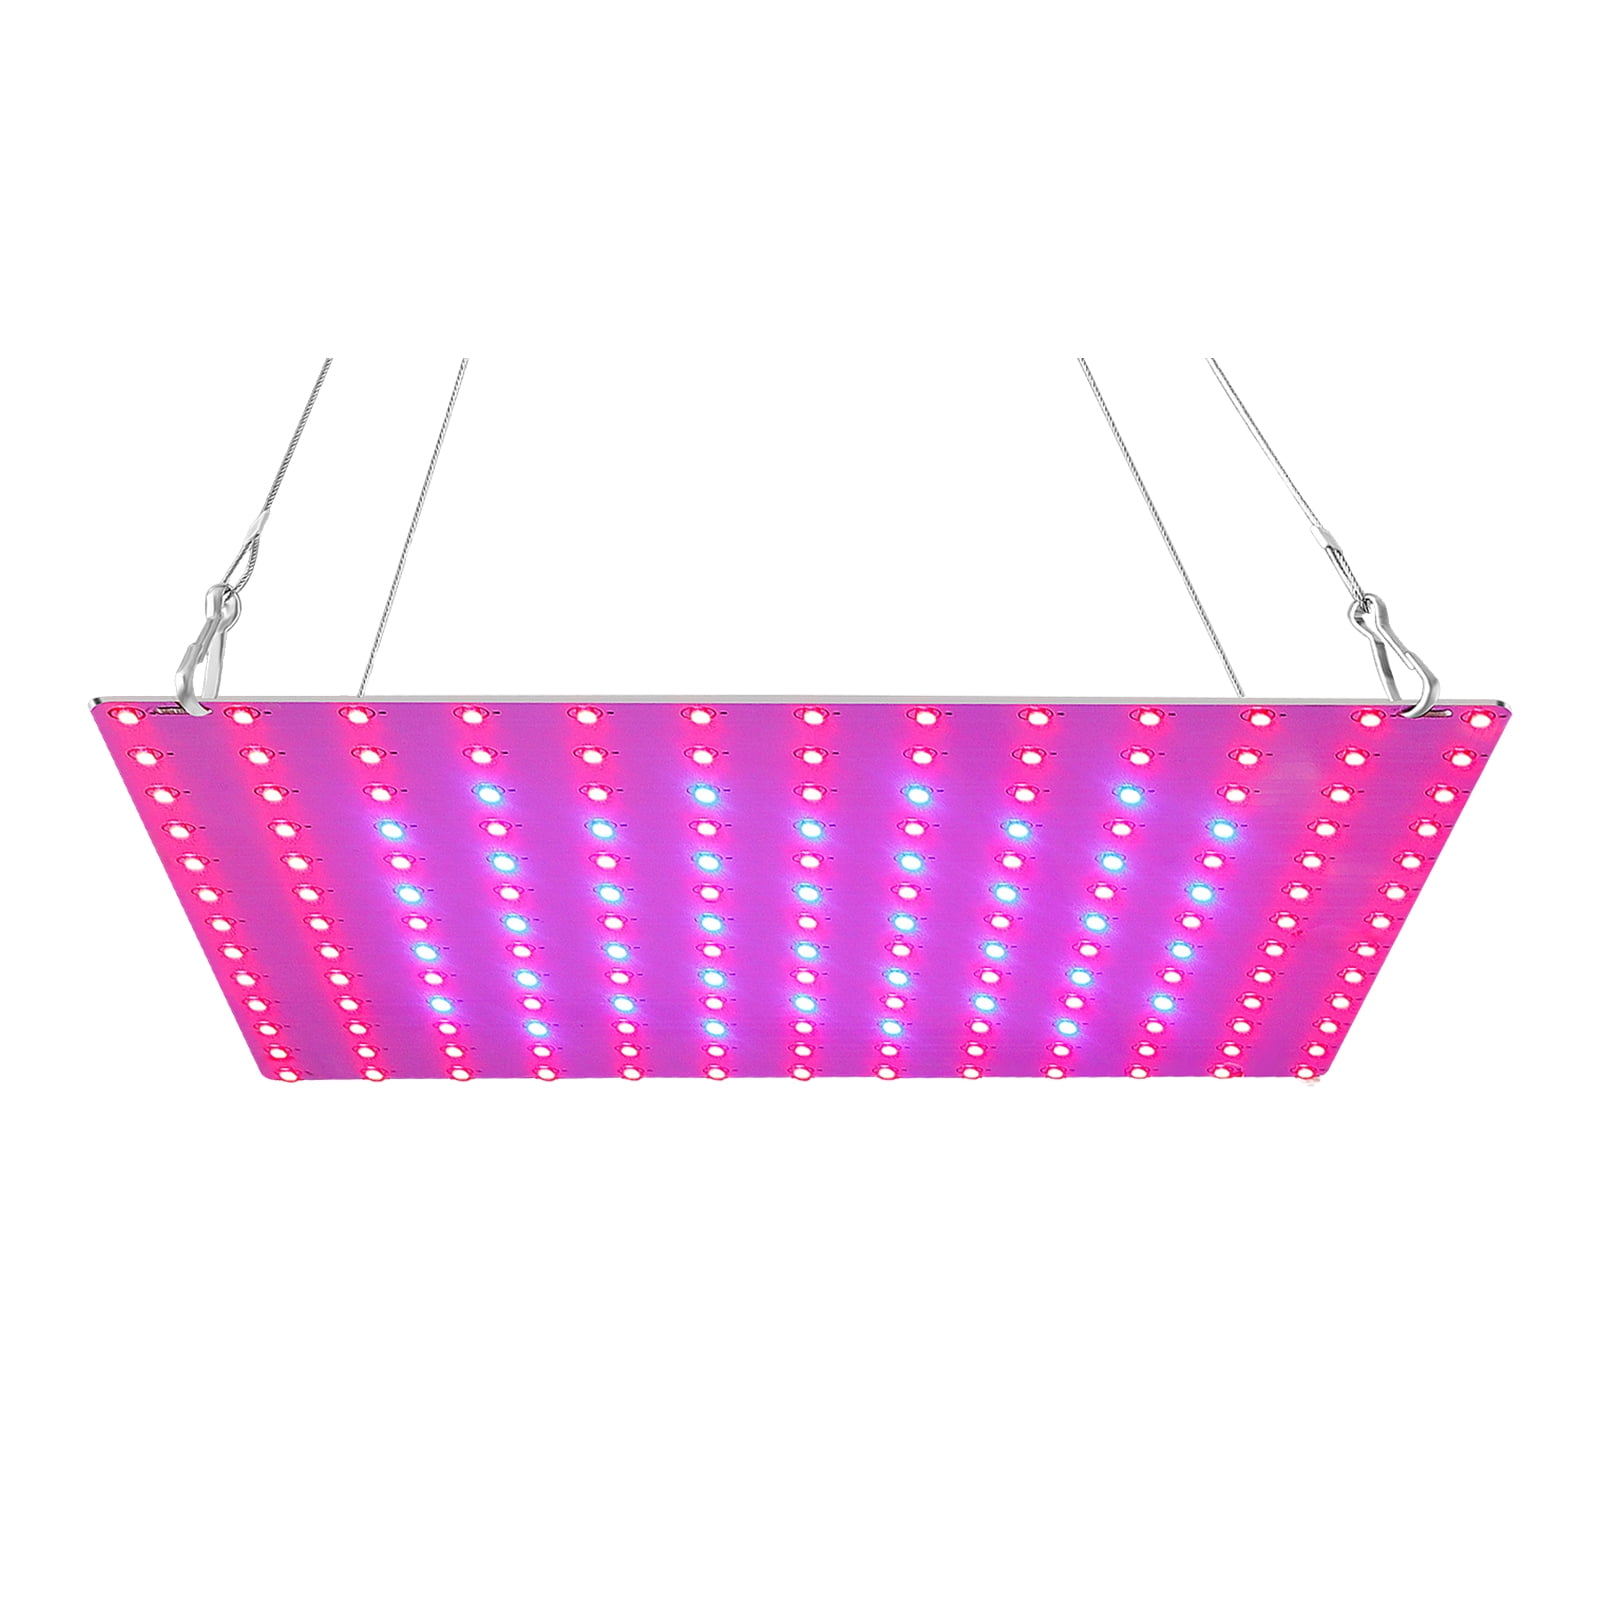 Details about   E27 Foldable Led Grow Light Full Spectrum Lamp for Hydroponics Plant Waterproof 